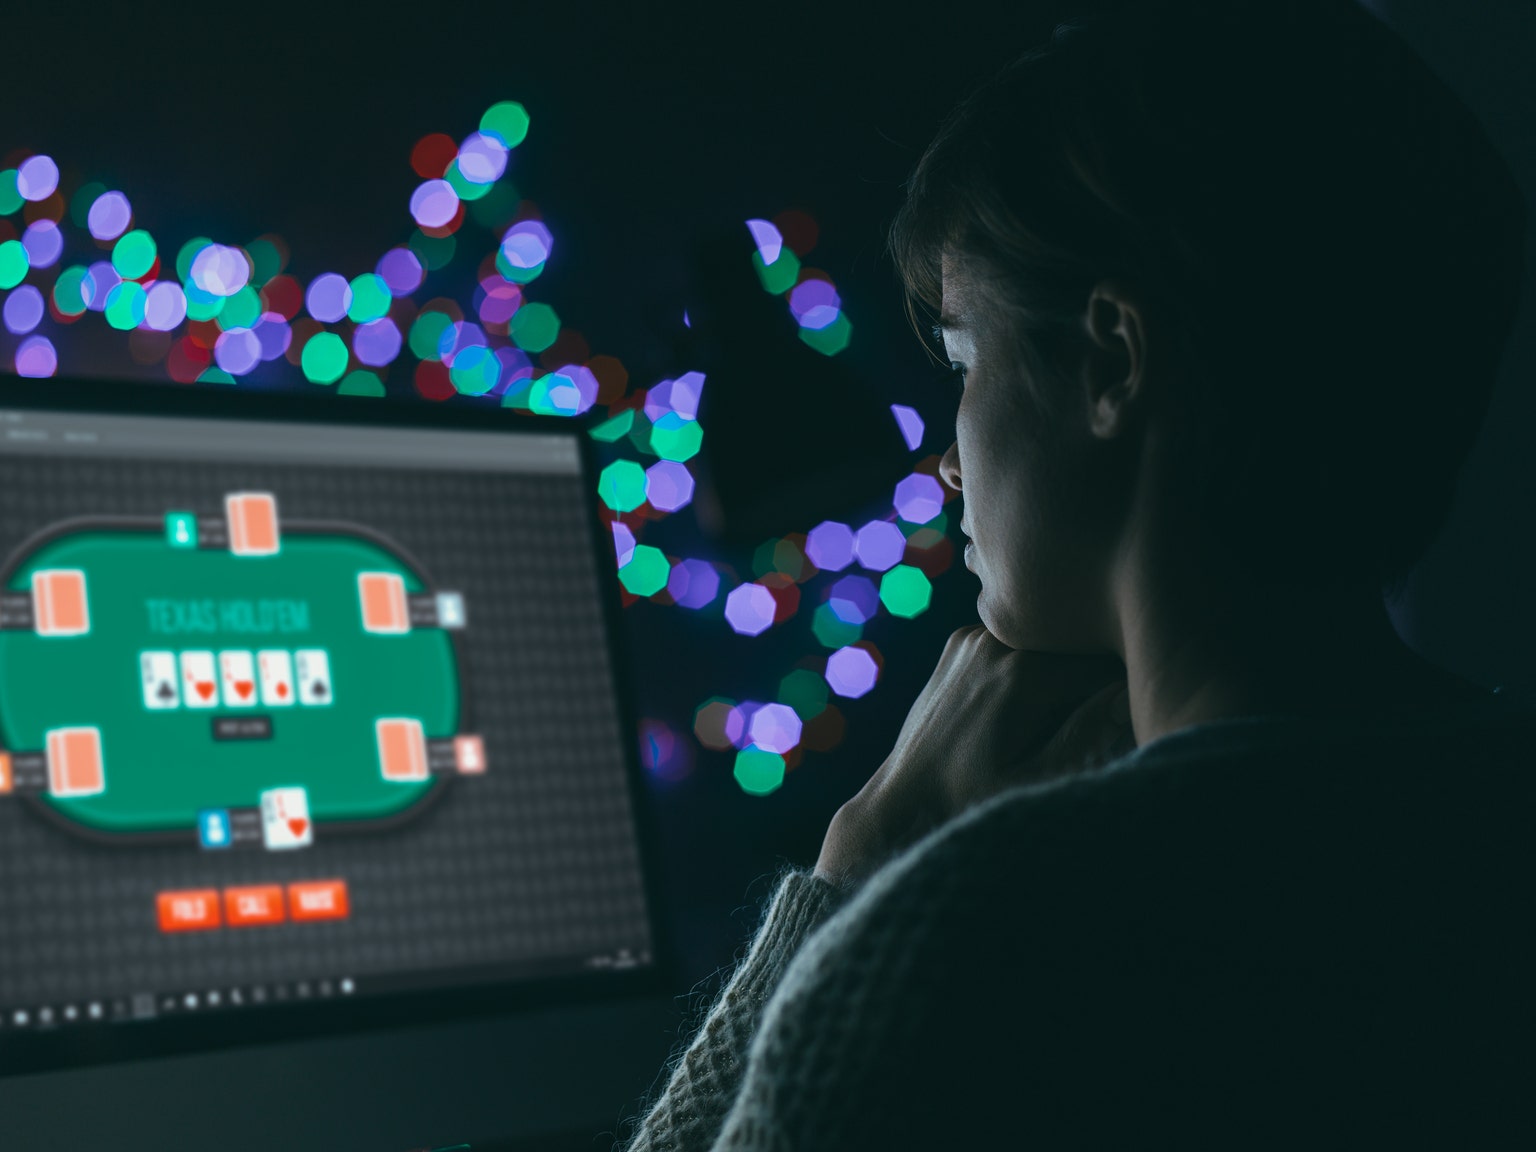 EGBA analyses European online gaming regulation and highlights the benefits  of multiple licenses